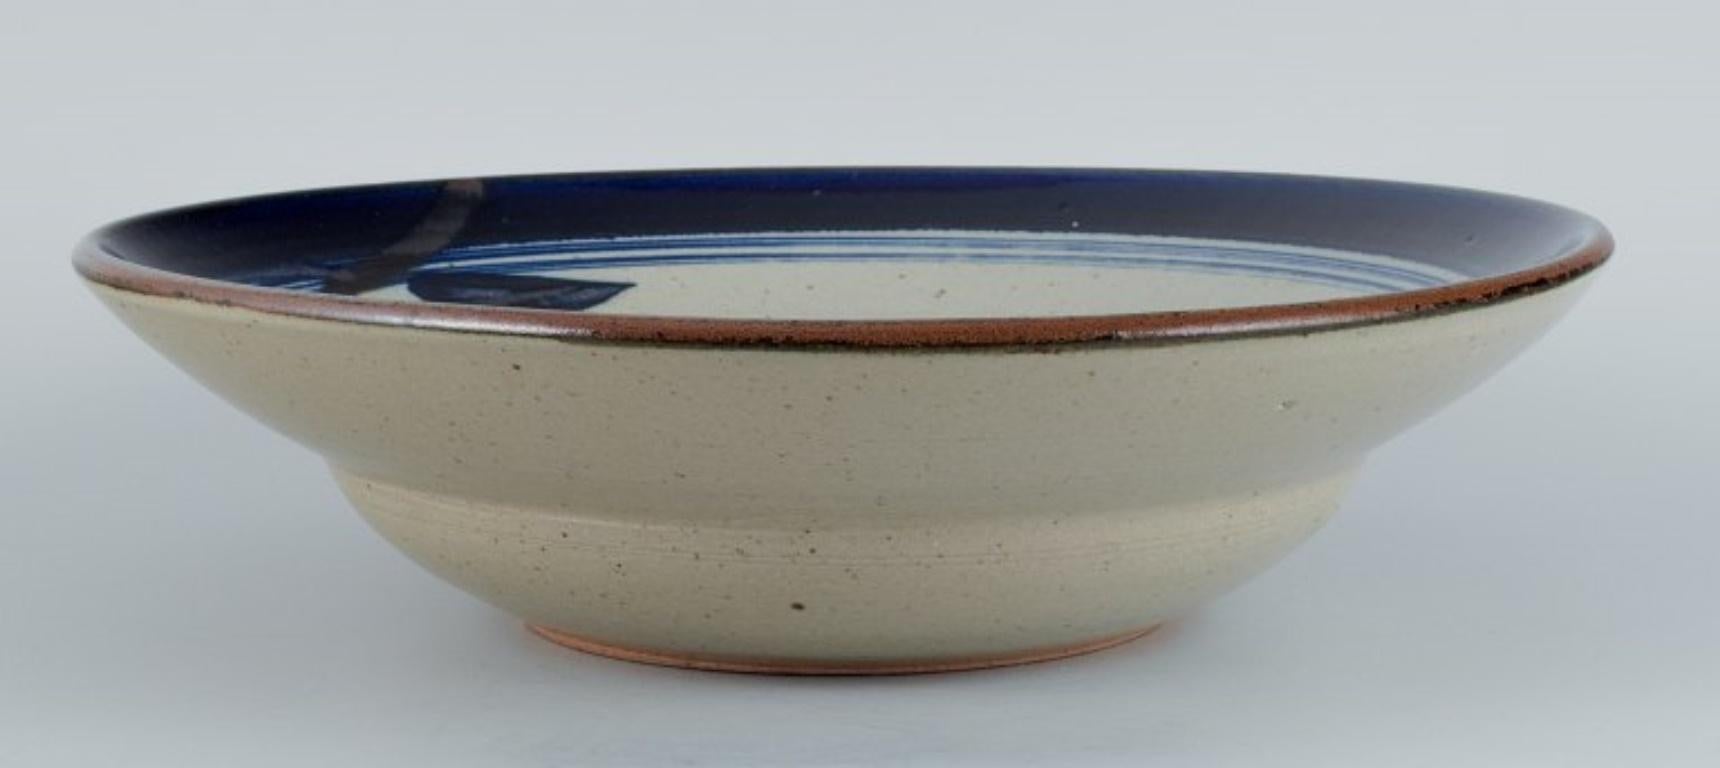 Carl Harry Stålhane for Designhuset.
Large bowl in earthenware with blue and light glaze.
1970s.
In perfect condition.
Signed.
Dimensions: D 33.0 x H 8.5 cm.